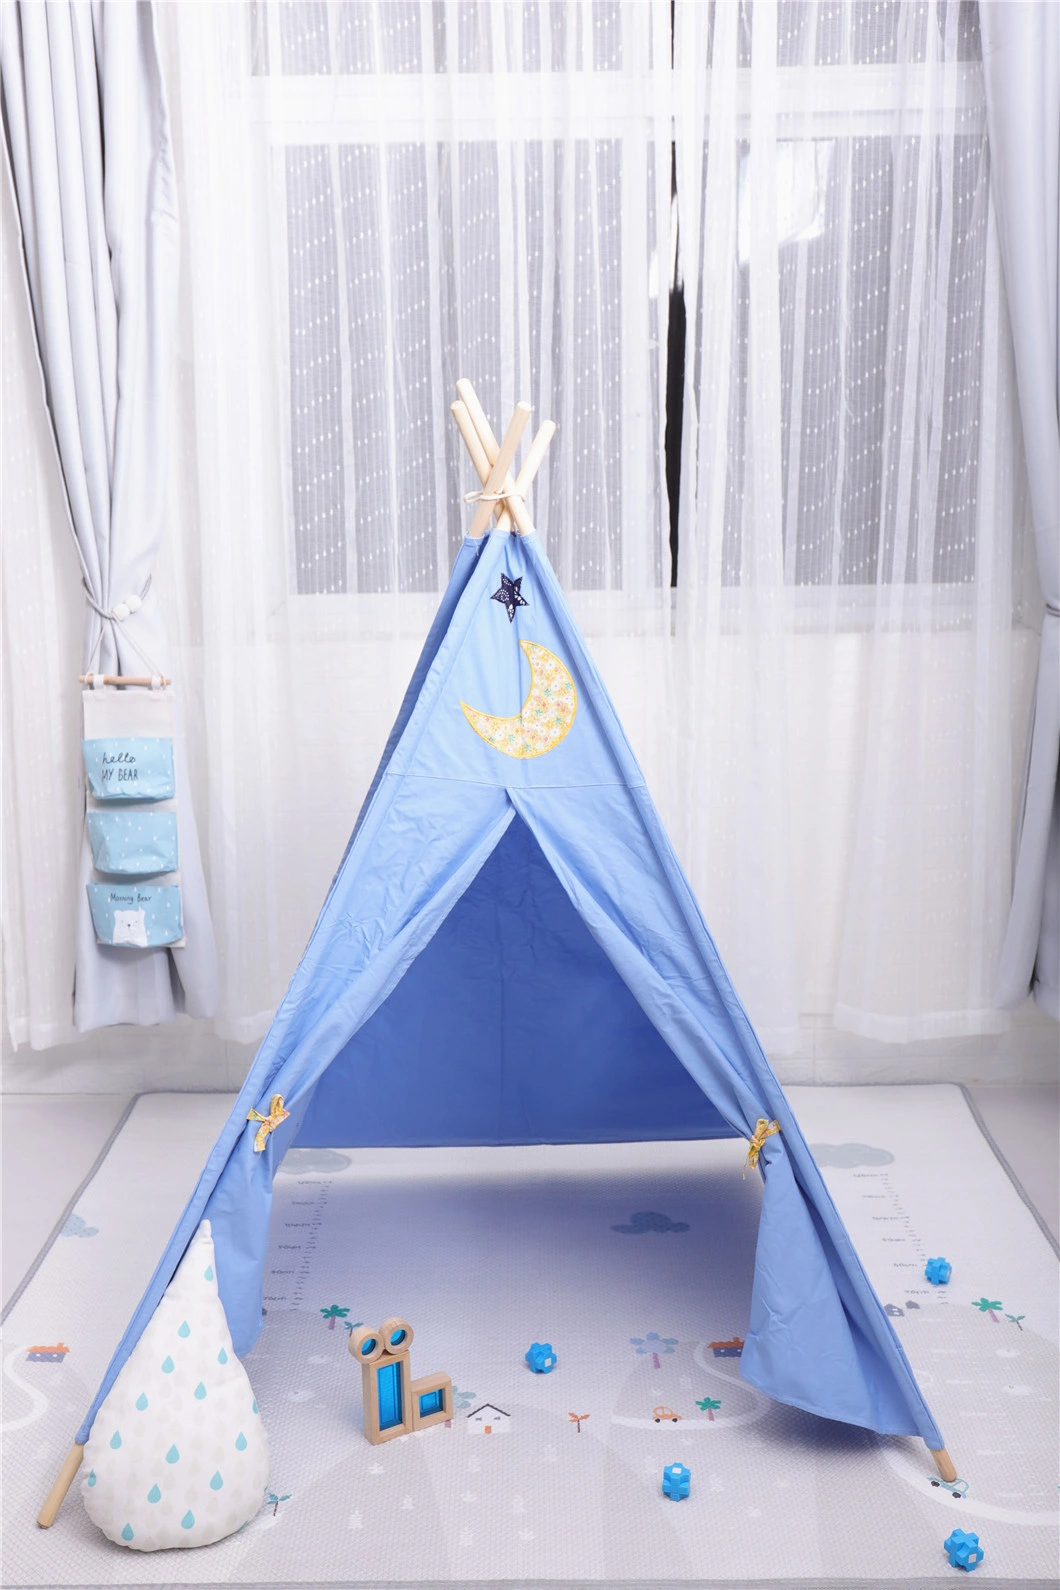 Kids Indian Teepee Tent Children Play Tent Indoor & Outdoor Toddler Playhouse Cotton Canvas Teepee with Wood Pole